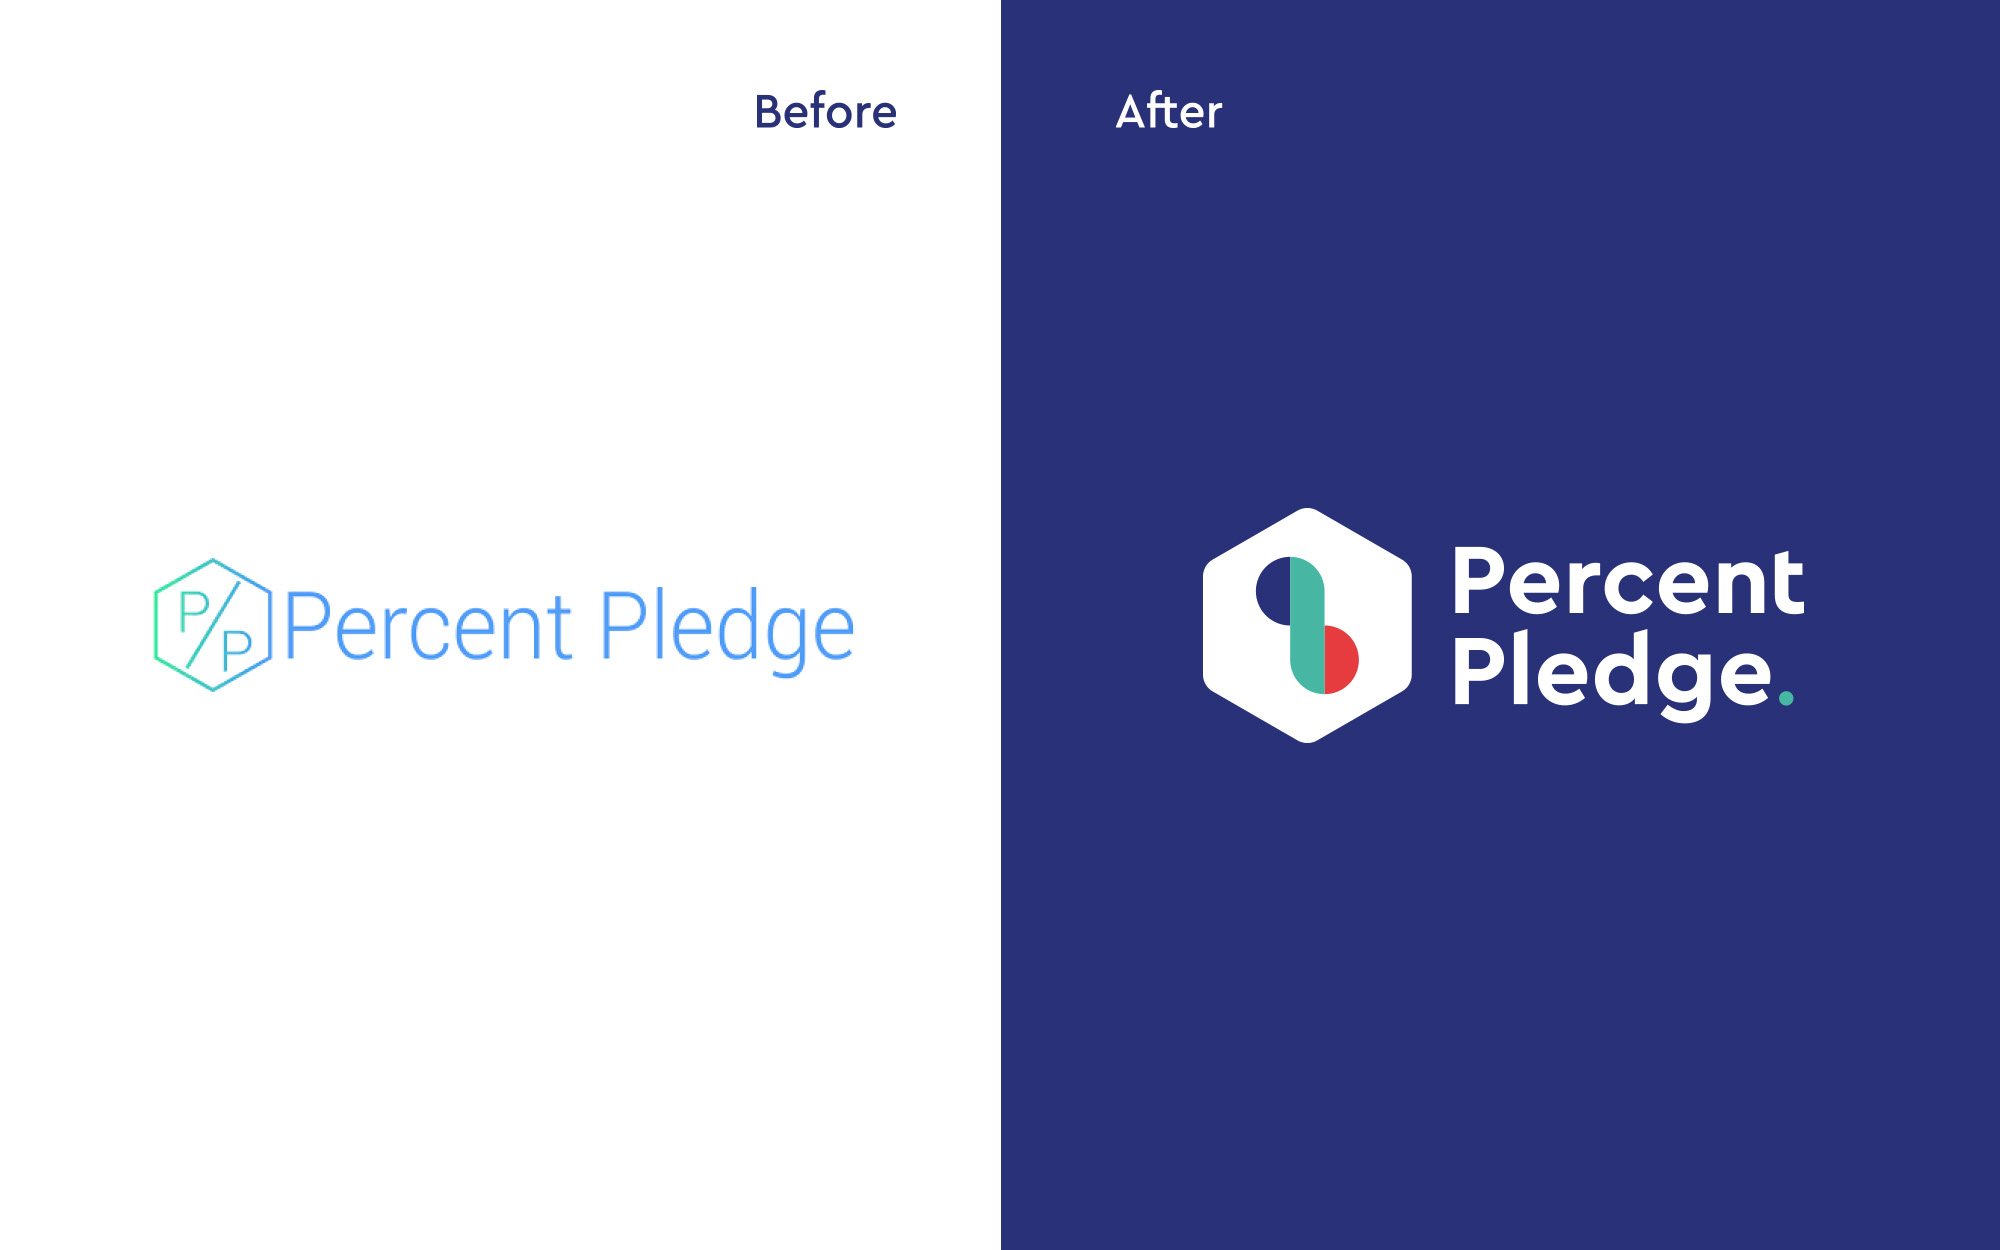 Percent Pledge before and after logo